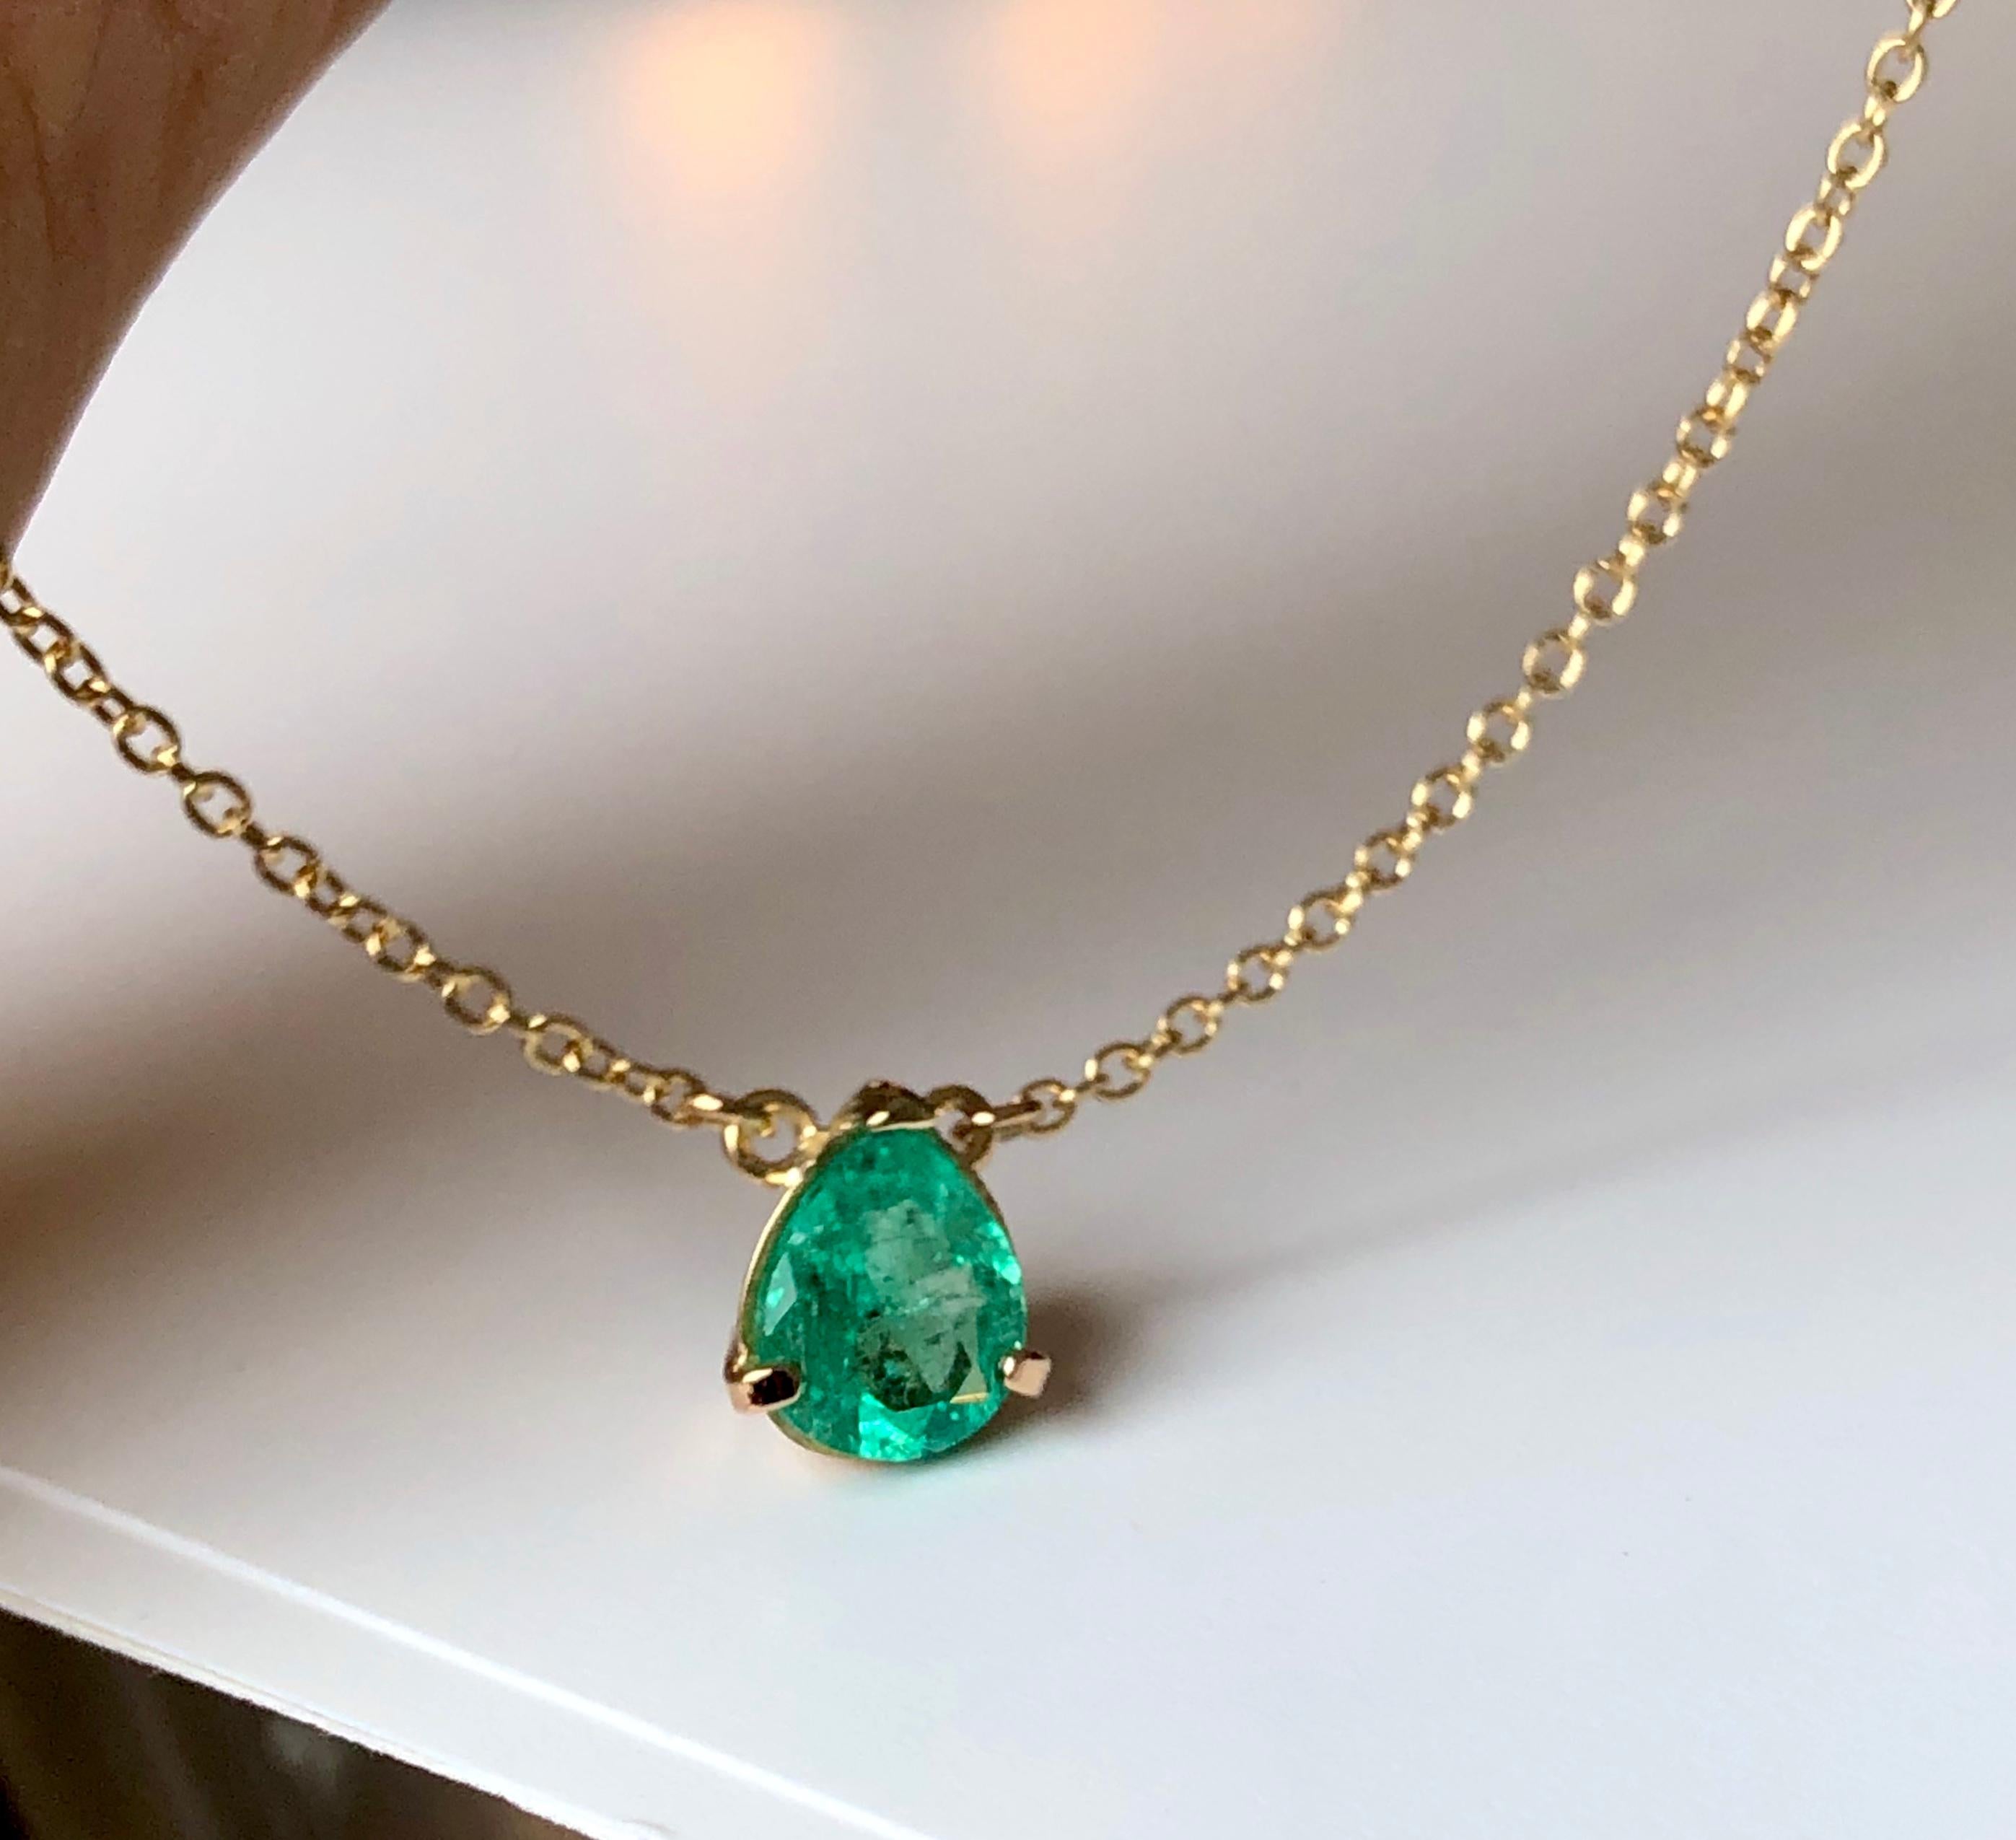 This drop solitaire pendant necklace features a pear cut,  medium green natural  Colombian emerald weighing 2.25 carats. Set in 18K yellow gold setting and fixed to a 16 Inches long, 18k gold chain.  Very style is good for everyday wear!
Total